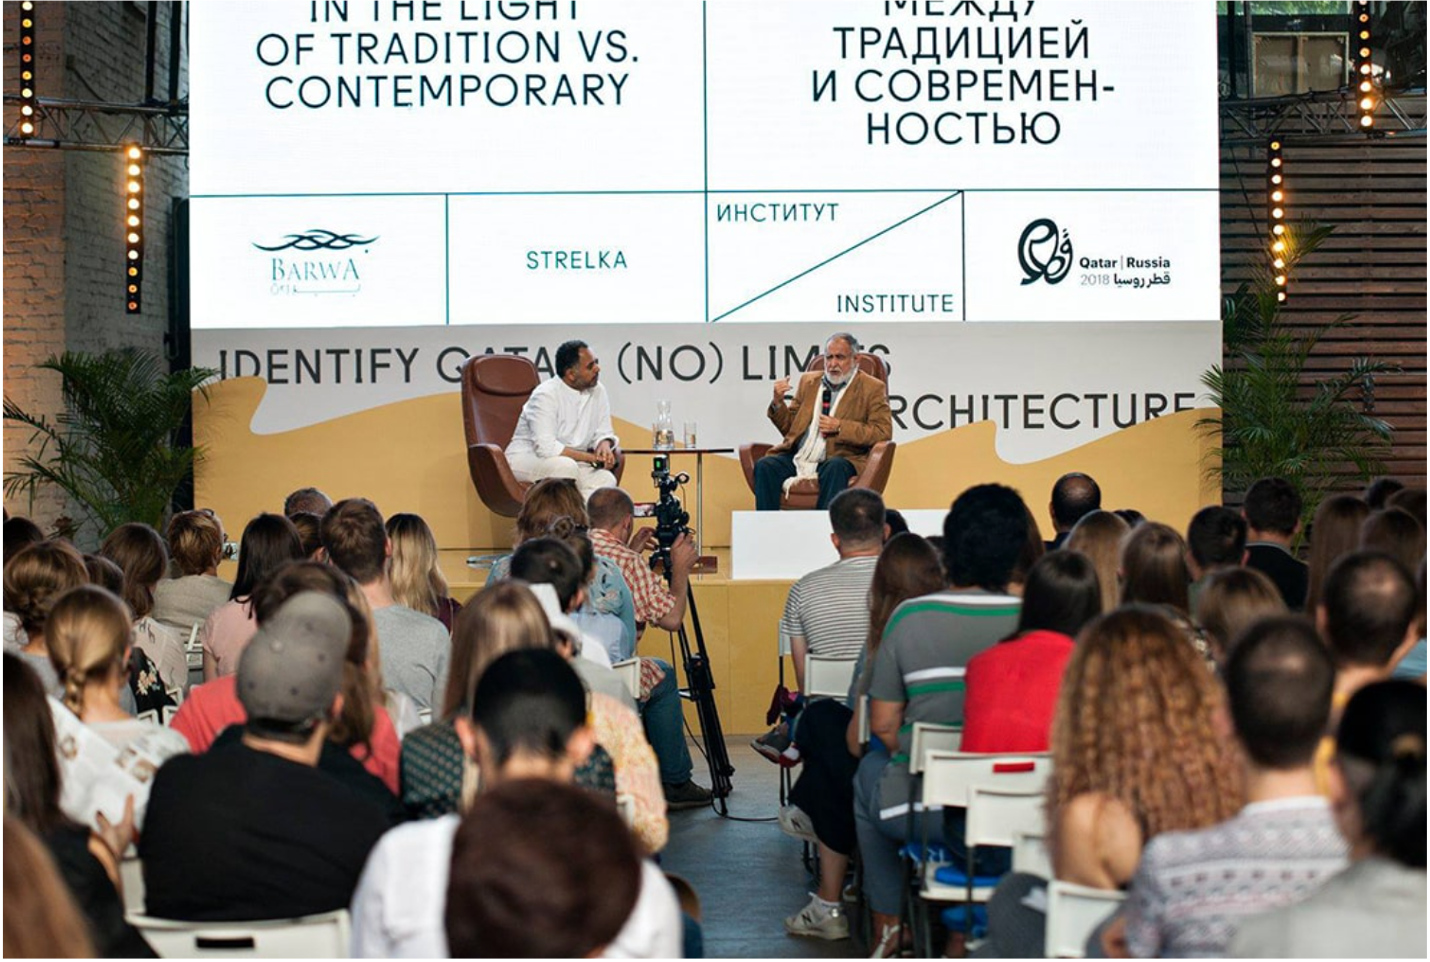 A mid-sized audience attend a talk during the “Limits of Architecture” conference at the Strelka Institute in Moscow, 